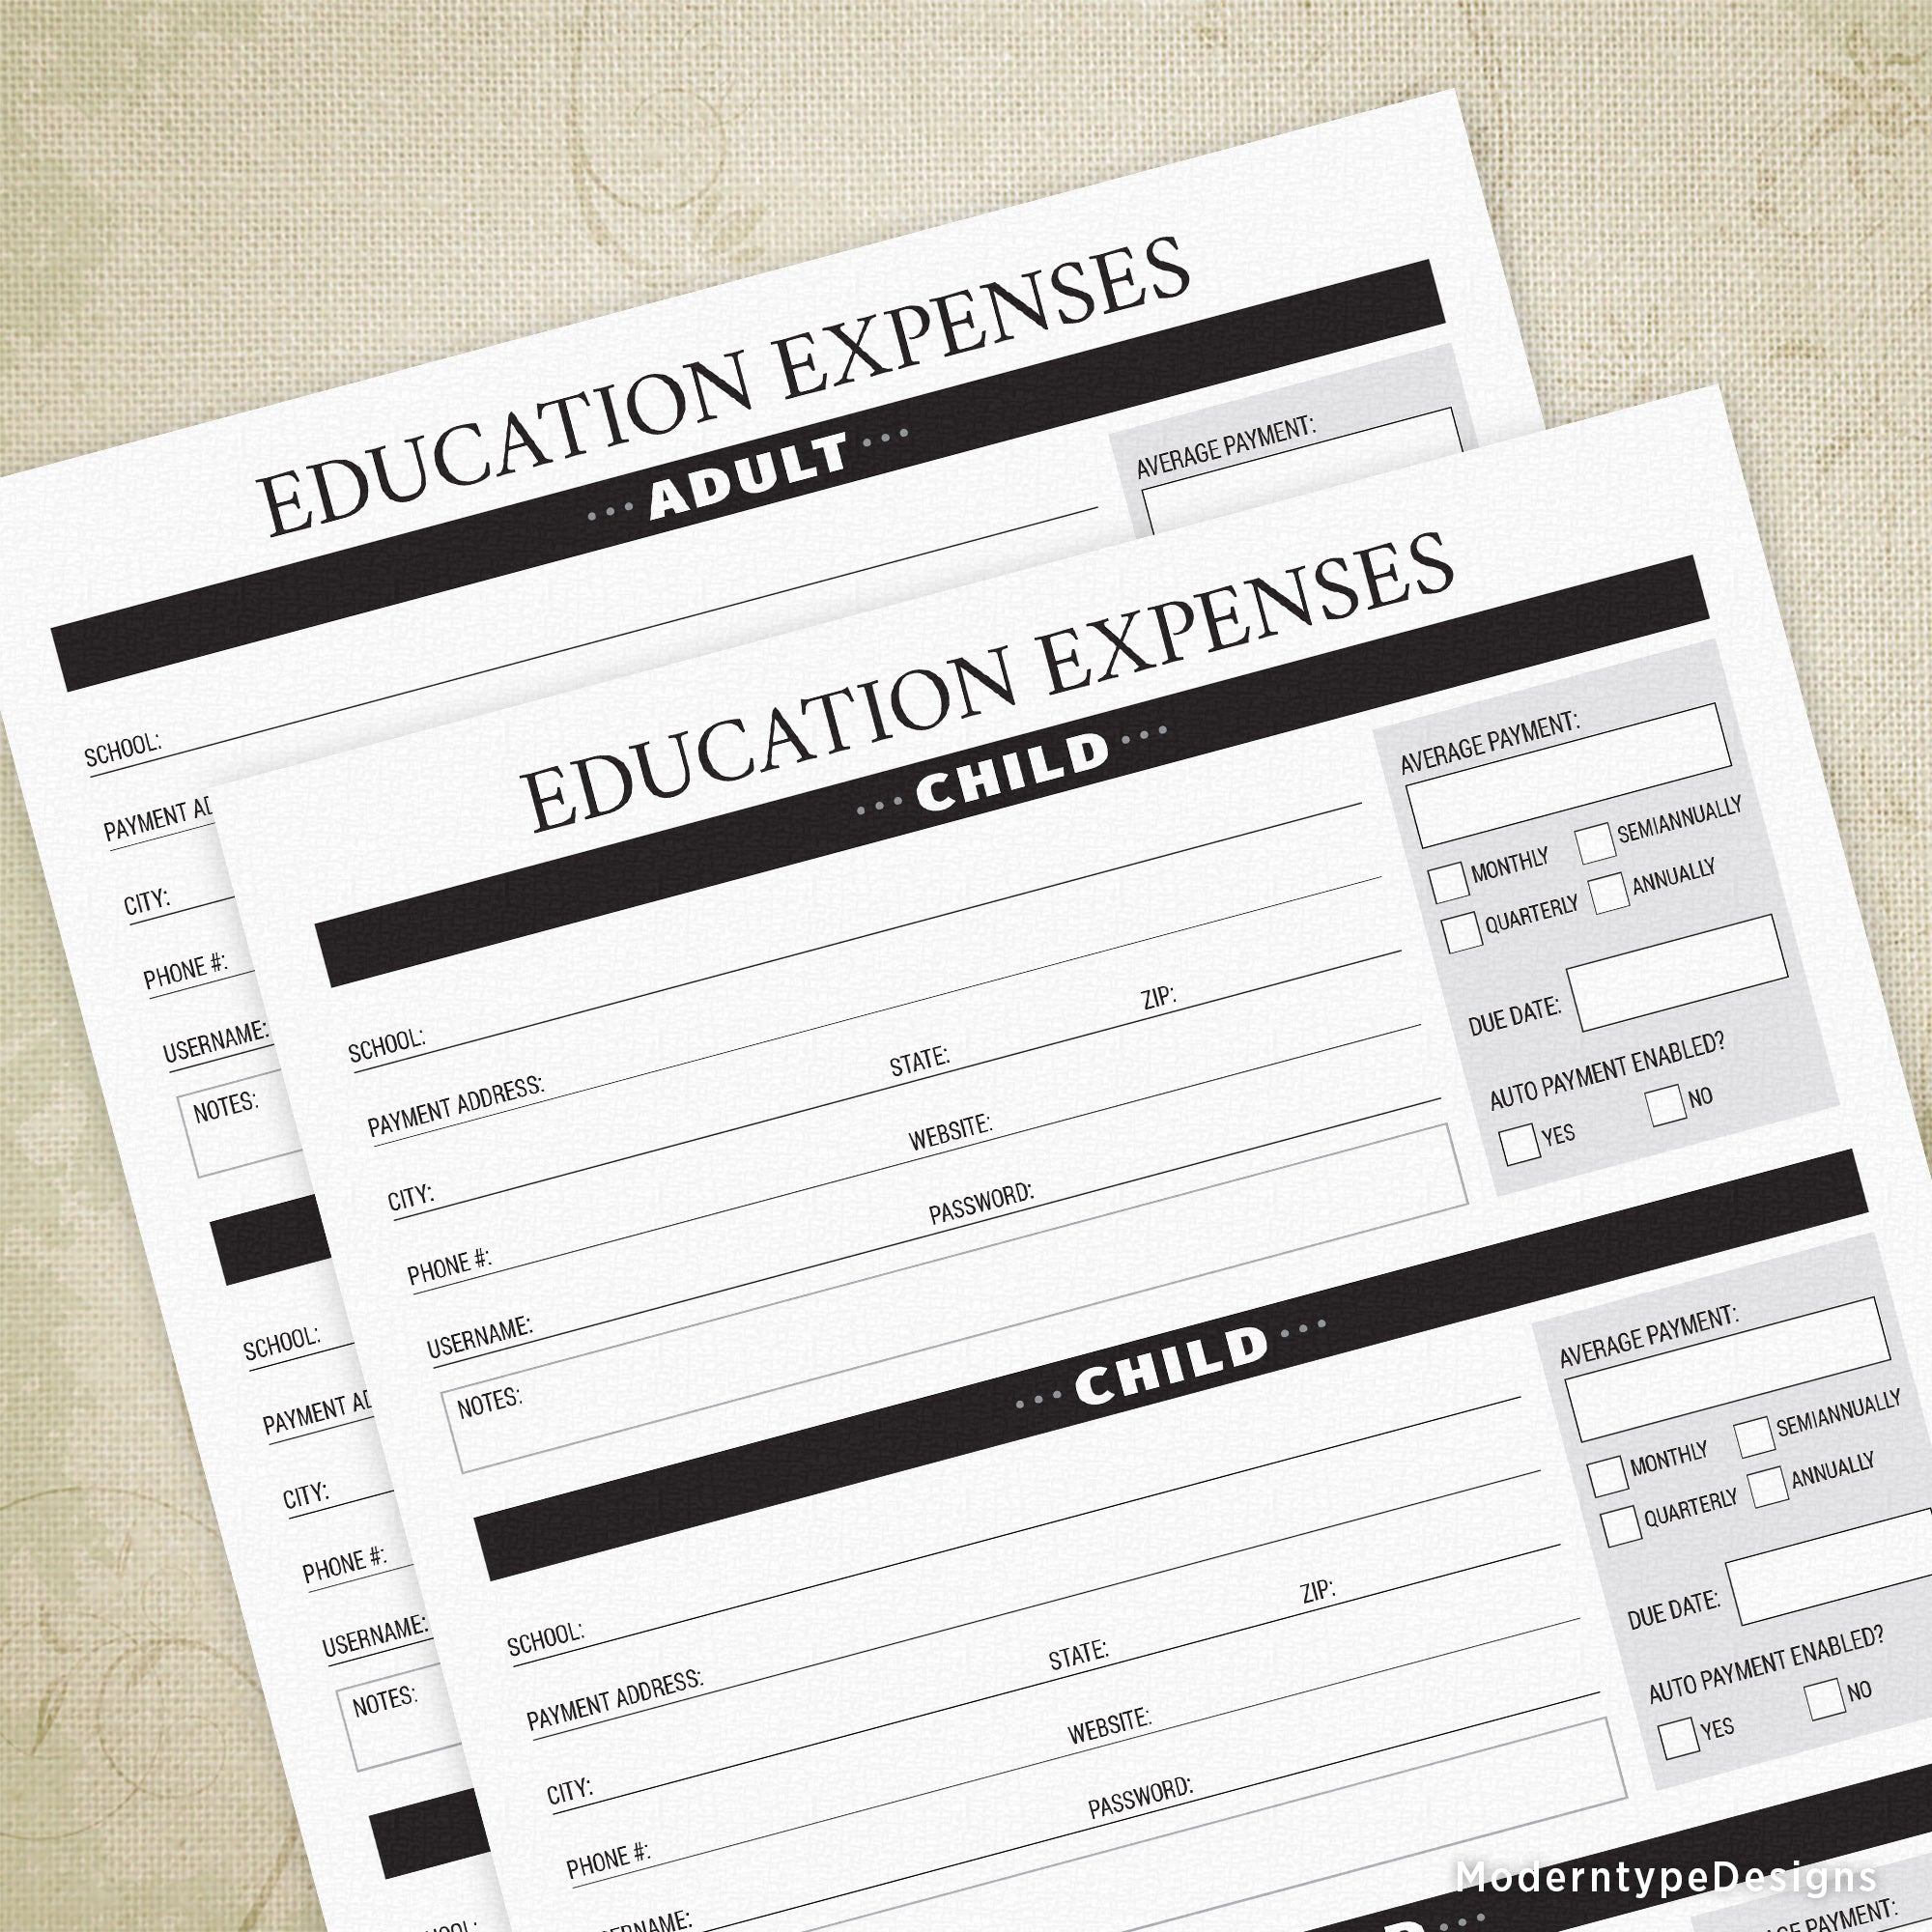 Education Expenses Printable - End of Life